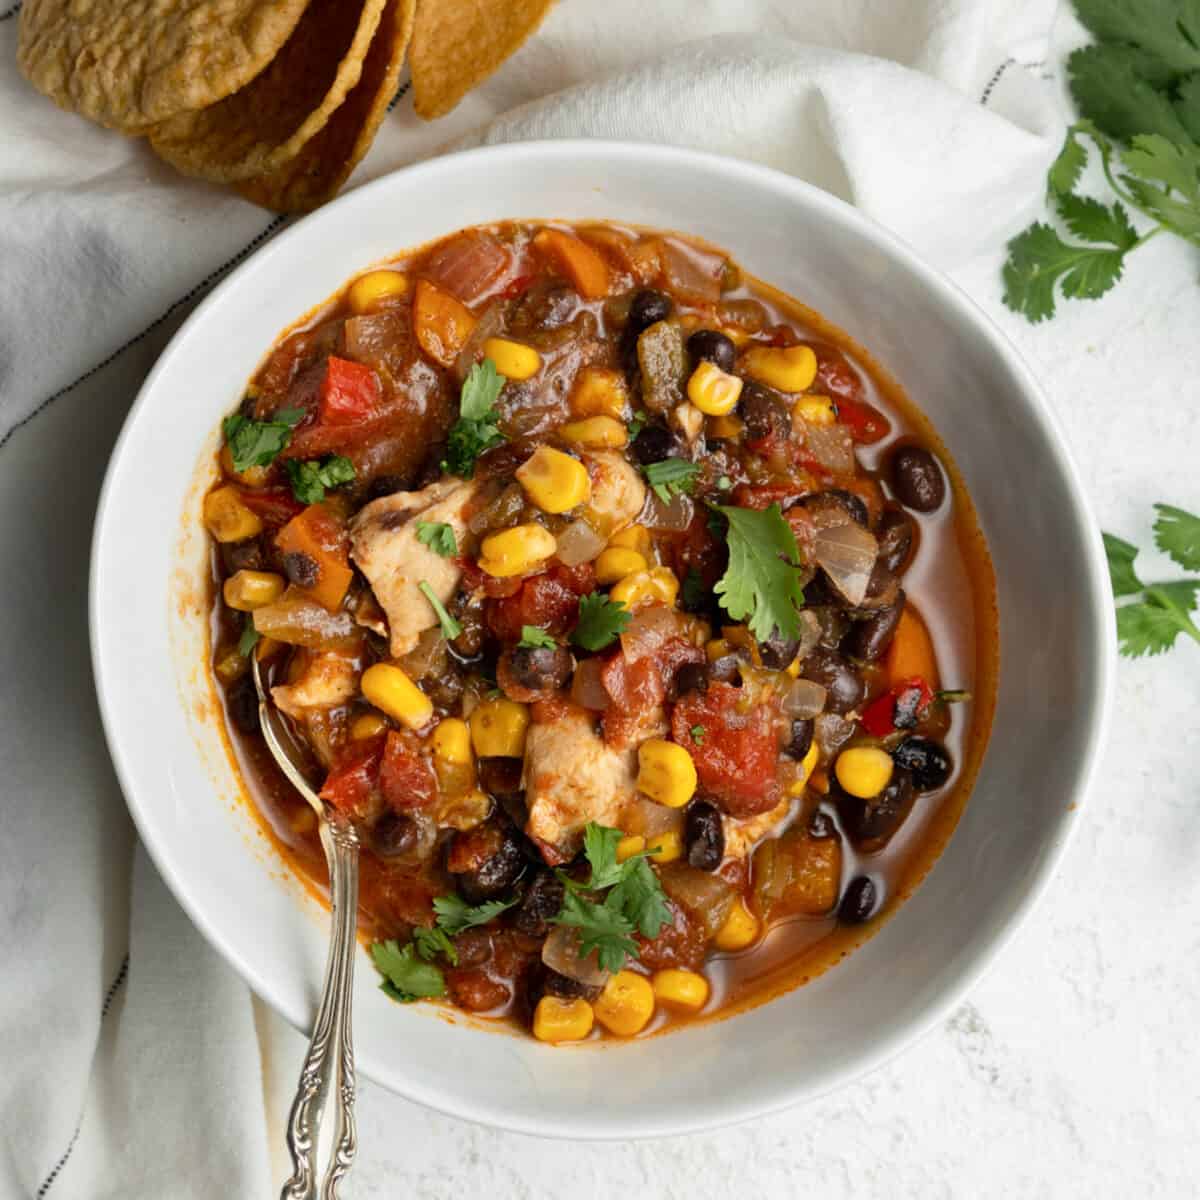 Bowl of black bean chili with chicken, corn and cilantro on top.